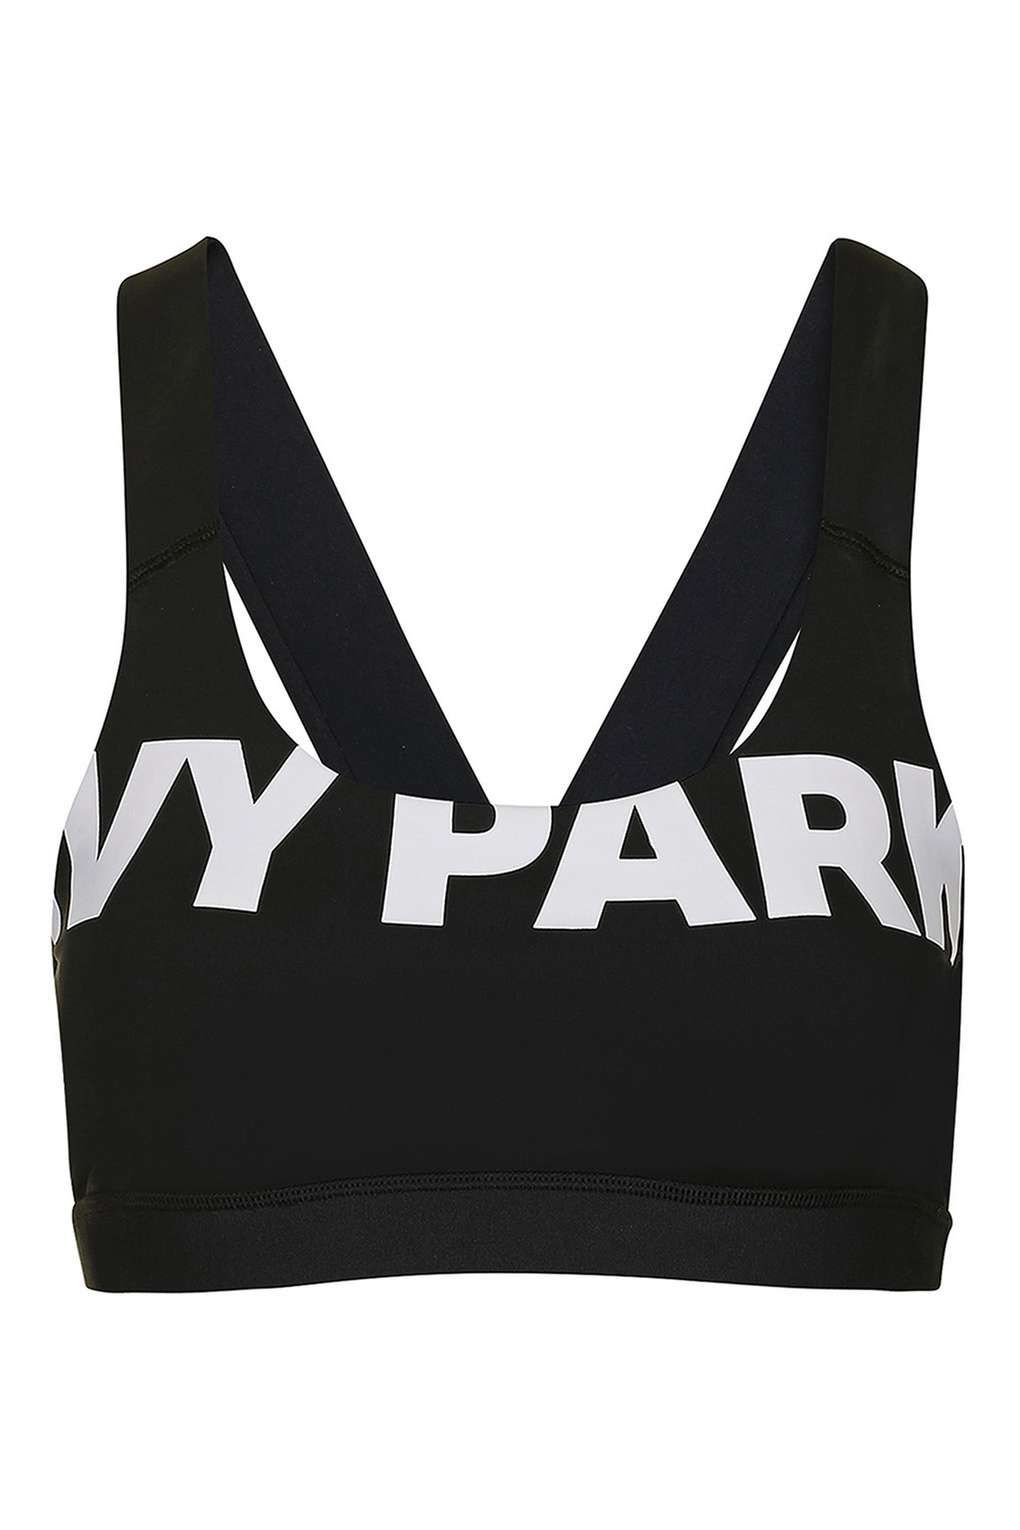 First Look: Beyonce's Ivy Park collection for Topshop arrives in